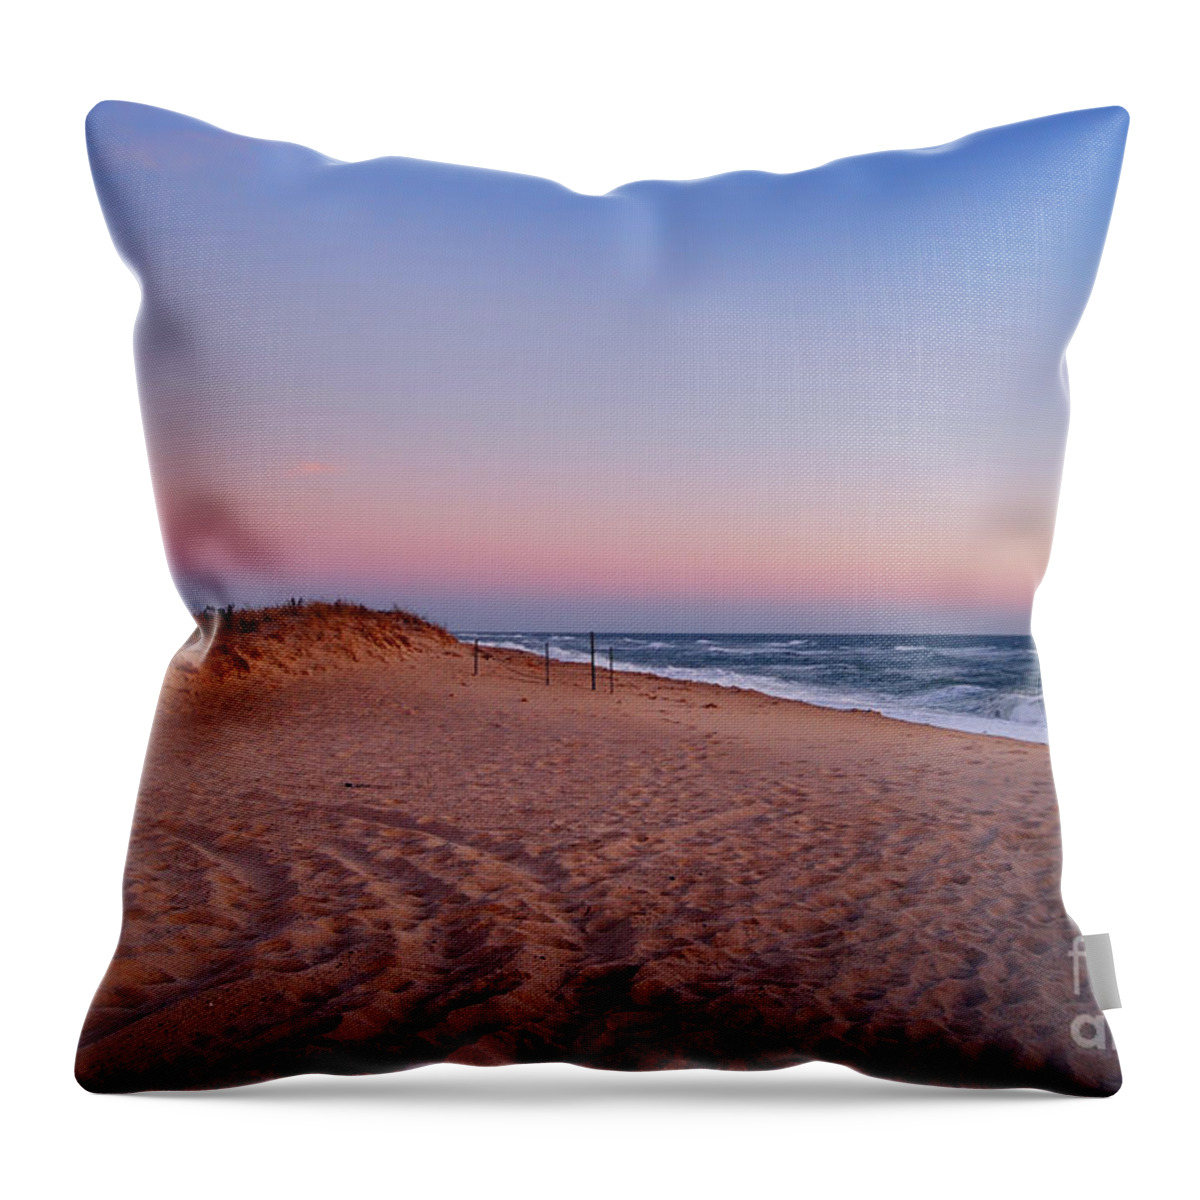 North America Throw Pillow featuring the photograph Evening Beachtime by Sabine Jacobs